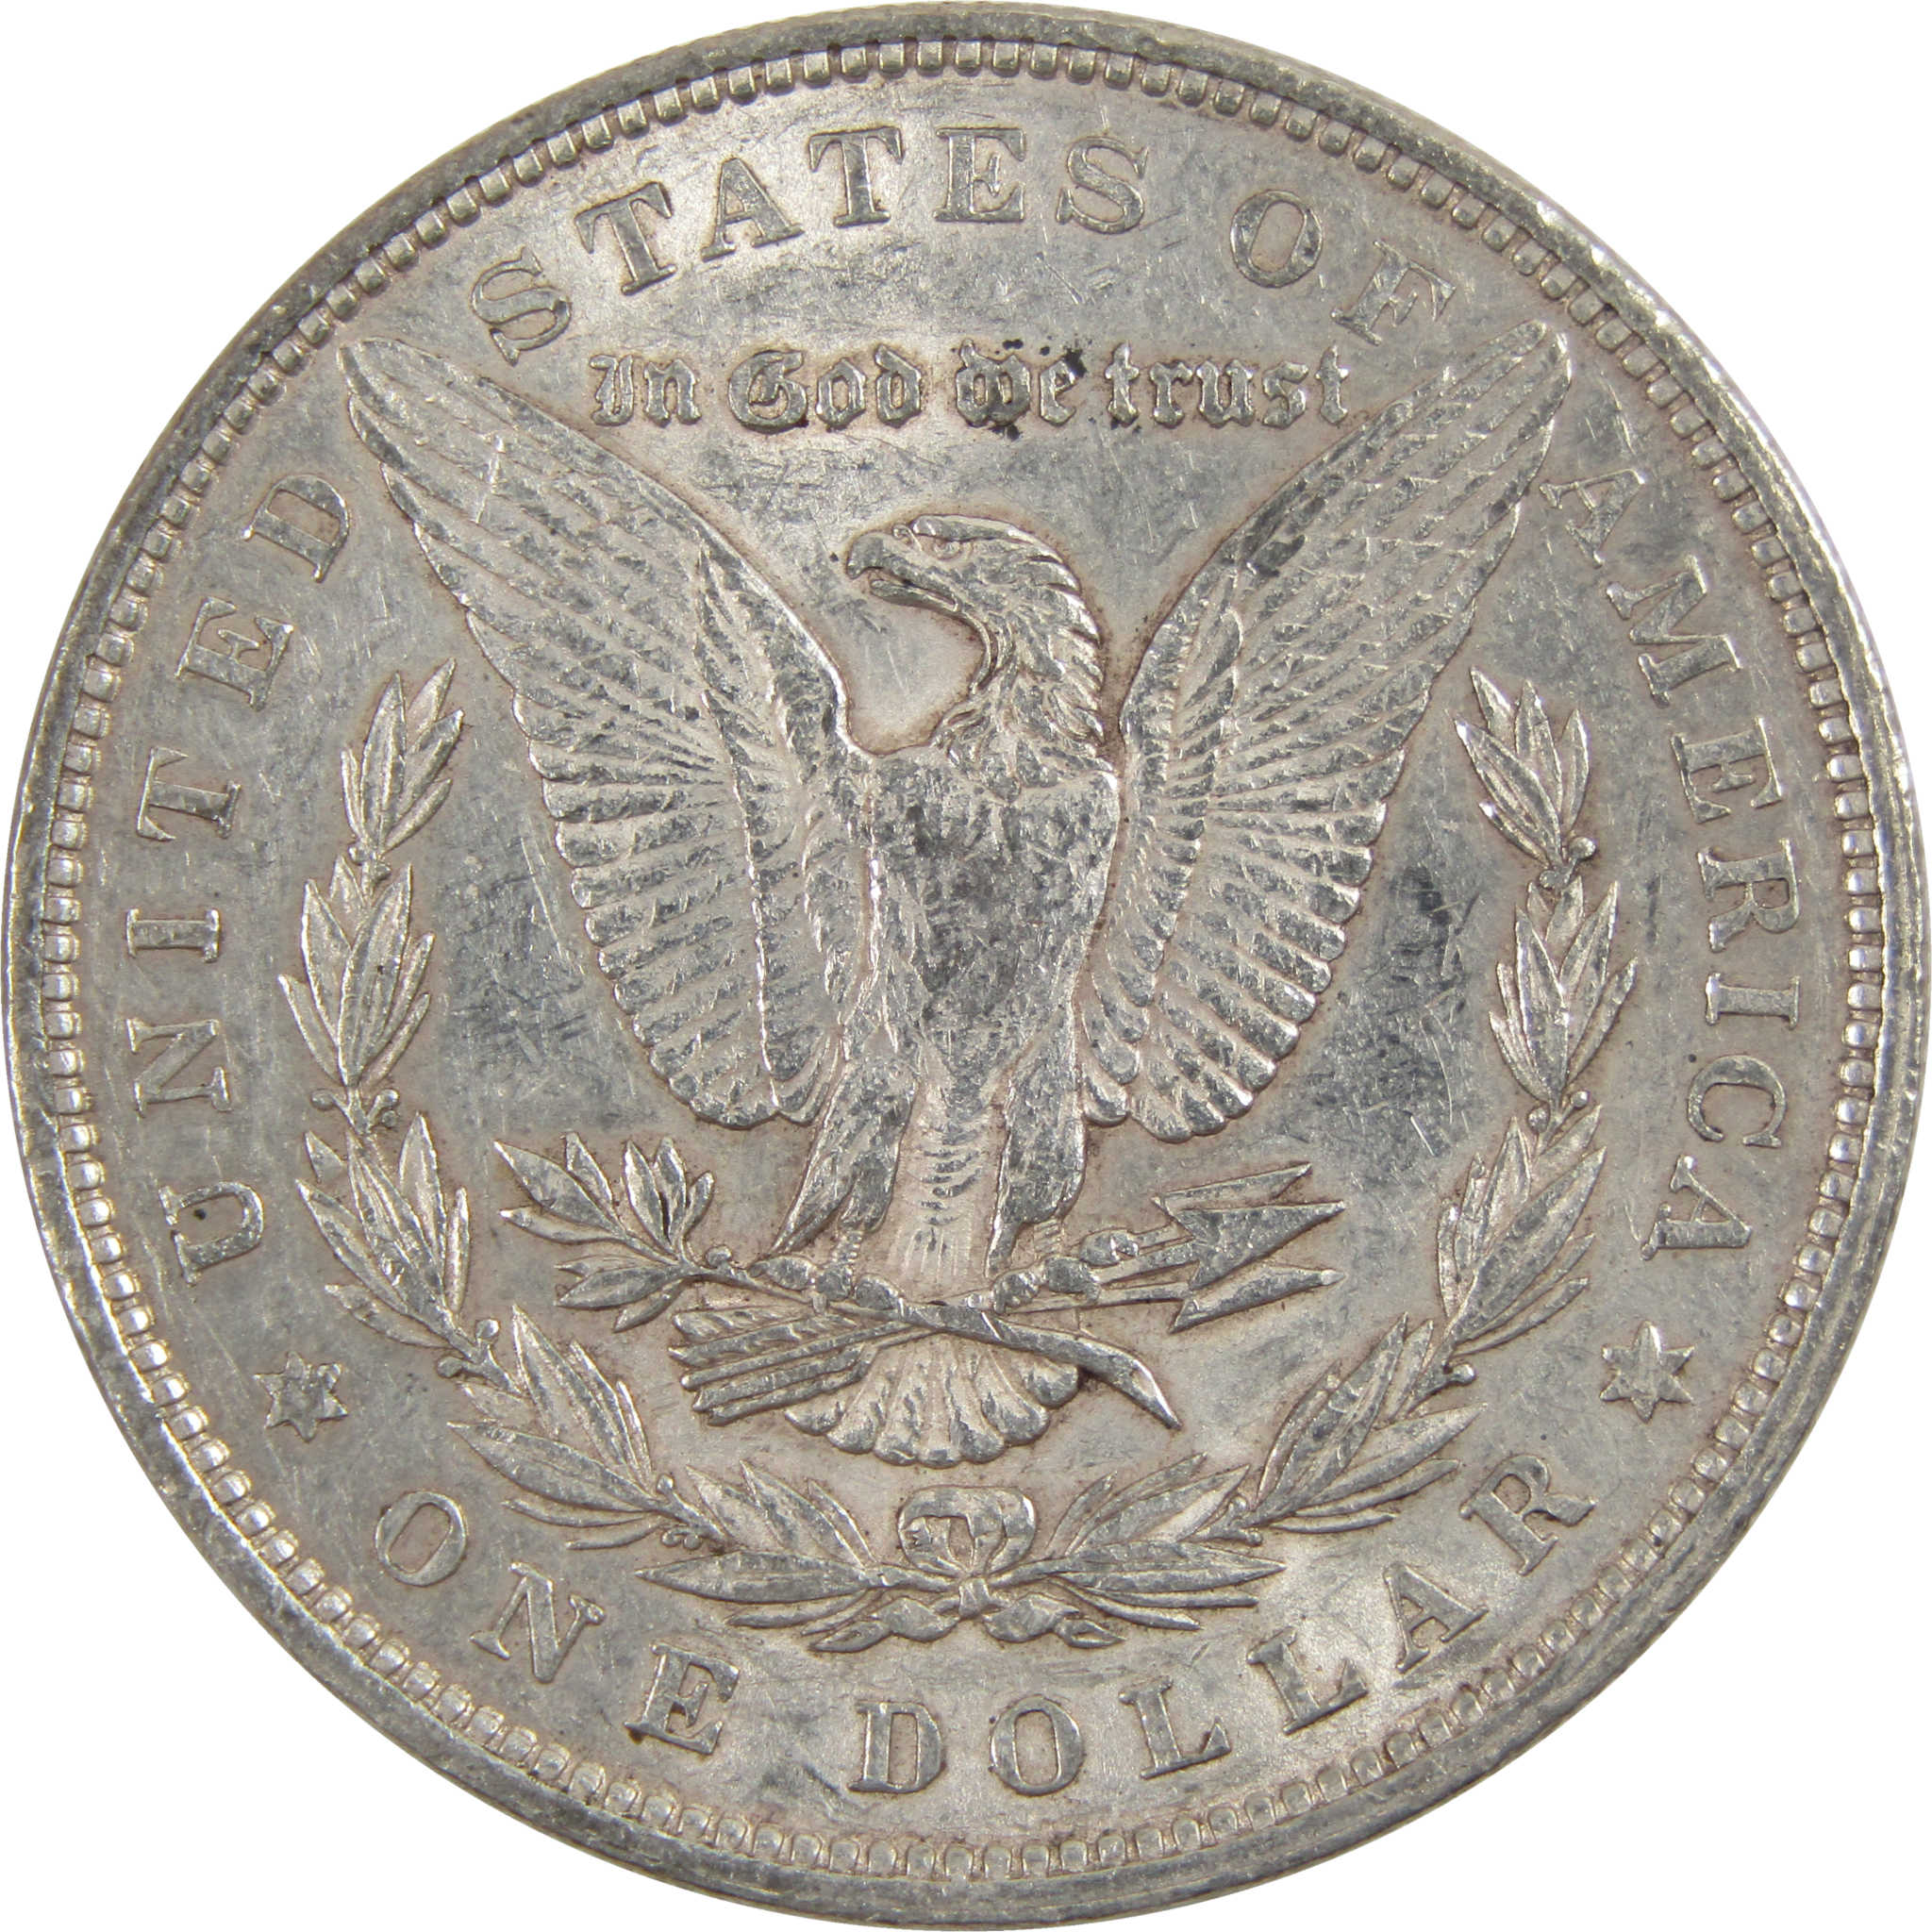 1878 7TF Rev 79 Morgan Dollar AU About Uncirculated Silver SKU:I8096 - Morgan coin - Morgan silver dollar - Morgan silver dollar for sale - Profile Coins &amp; Collectibles